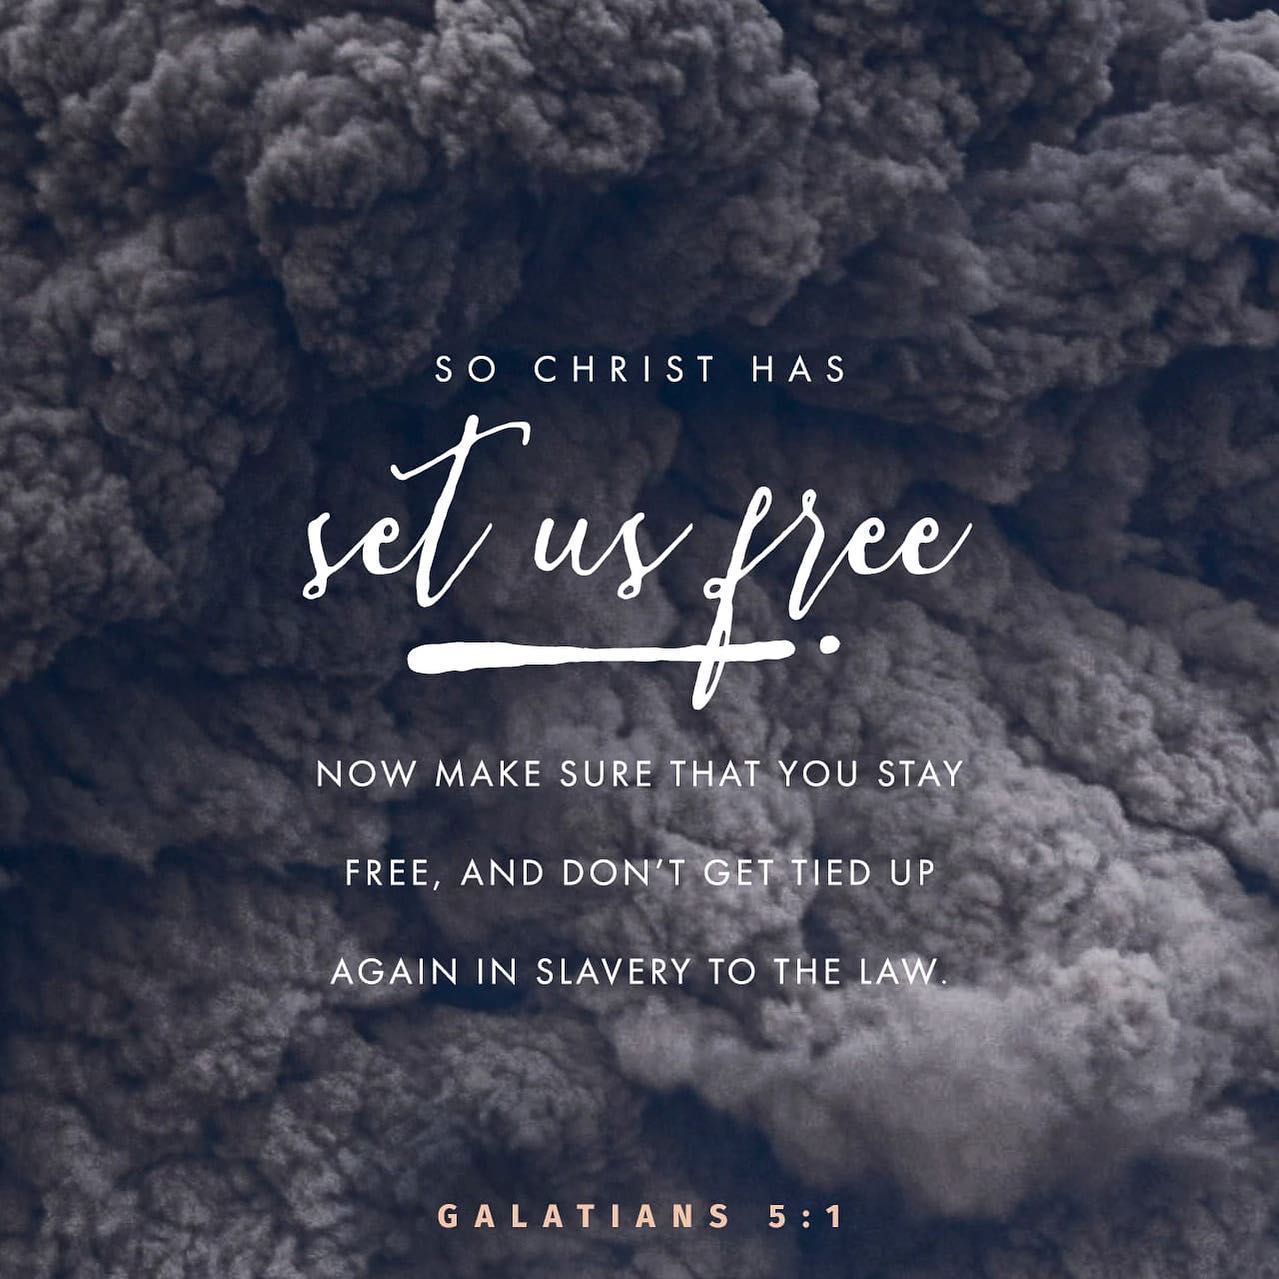 “So Christ has truly set us free. Now make sure that you stay free, and don’t get tied up again in slavery to the law.”

‭‭Galatians‬ ‭5:1‬ ‭